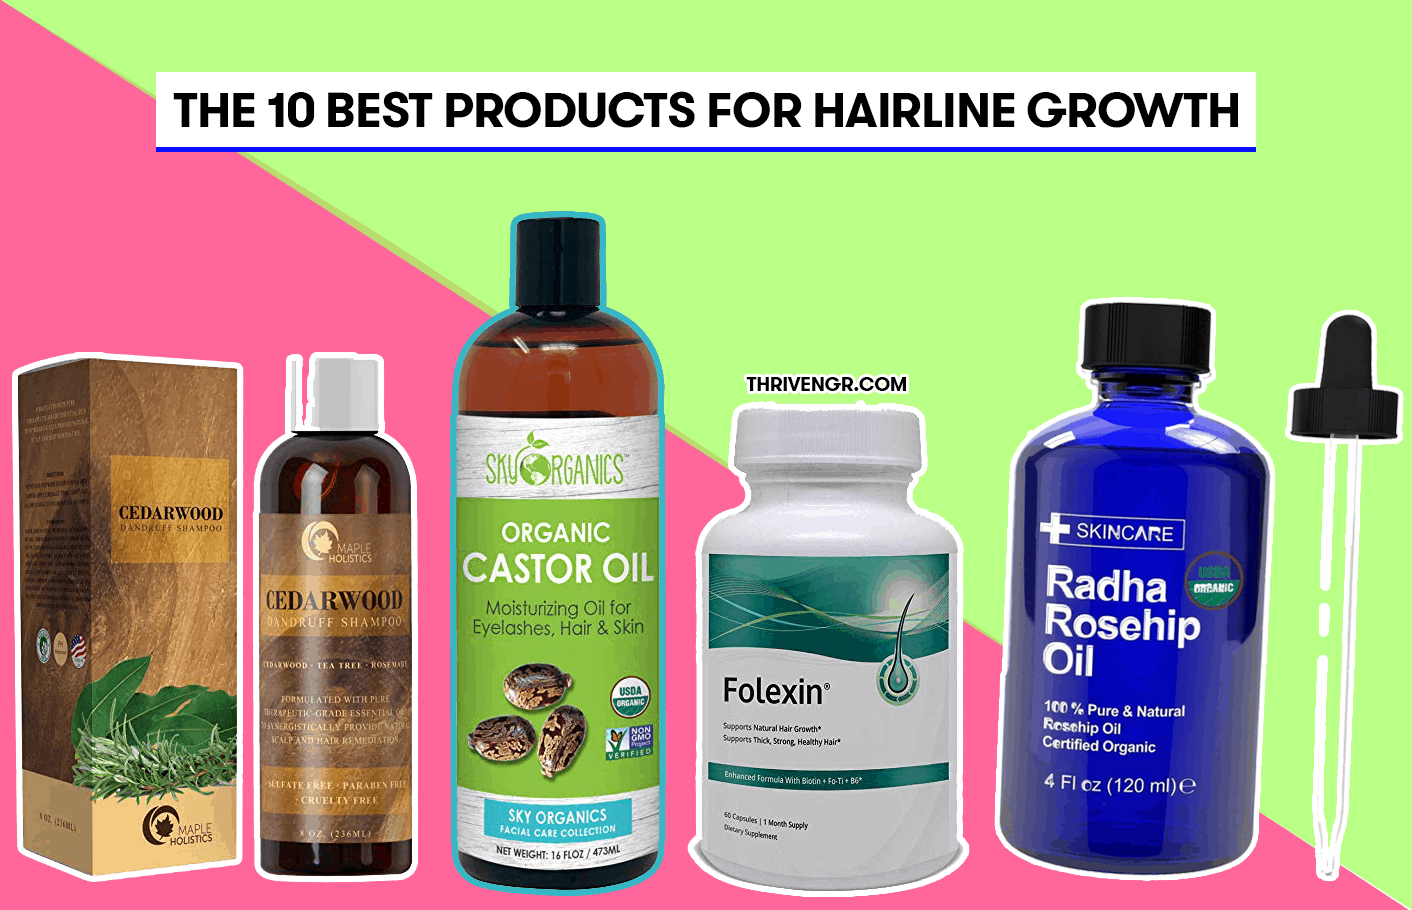 The 10 Best Products For Hairline Growth 2020 (Updated)